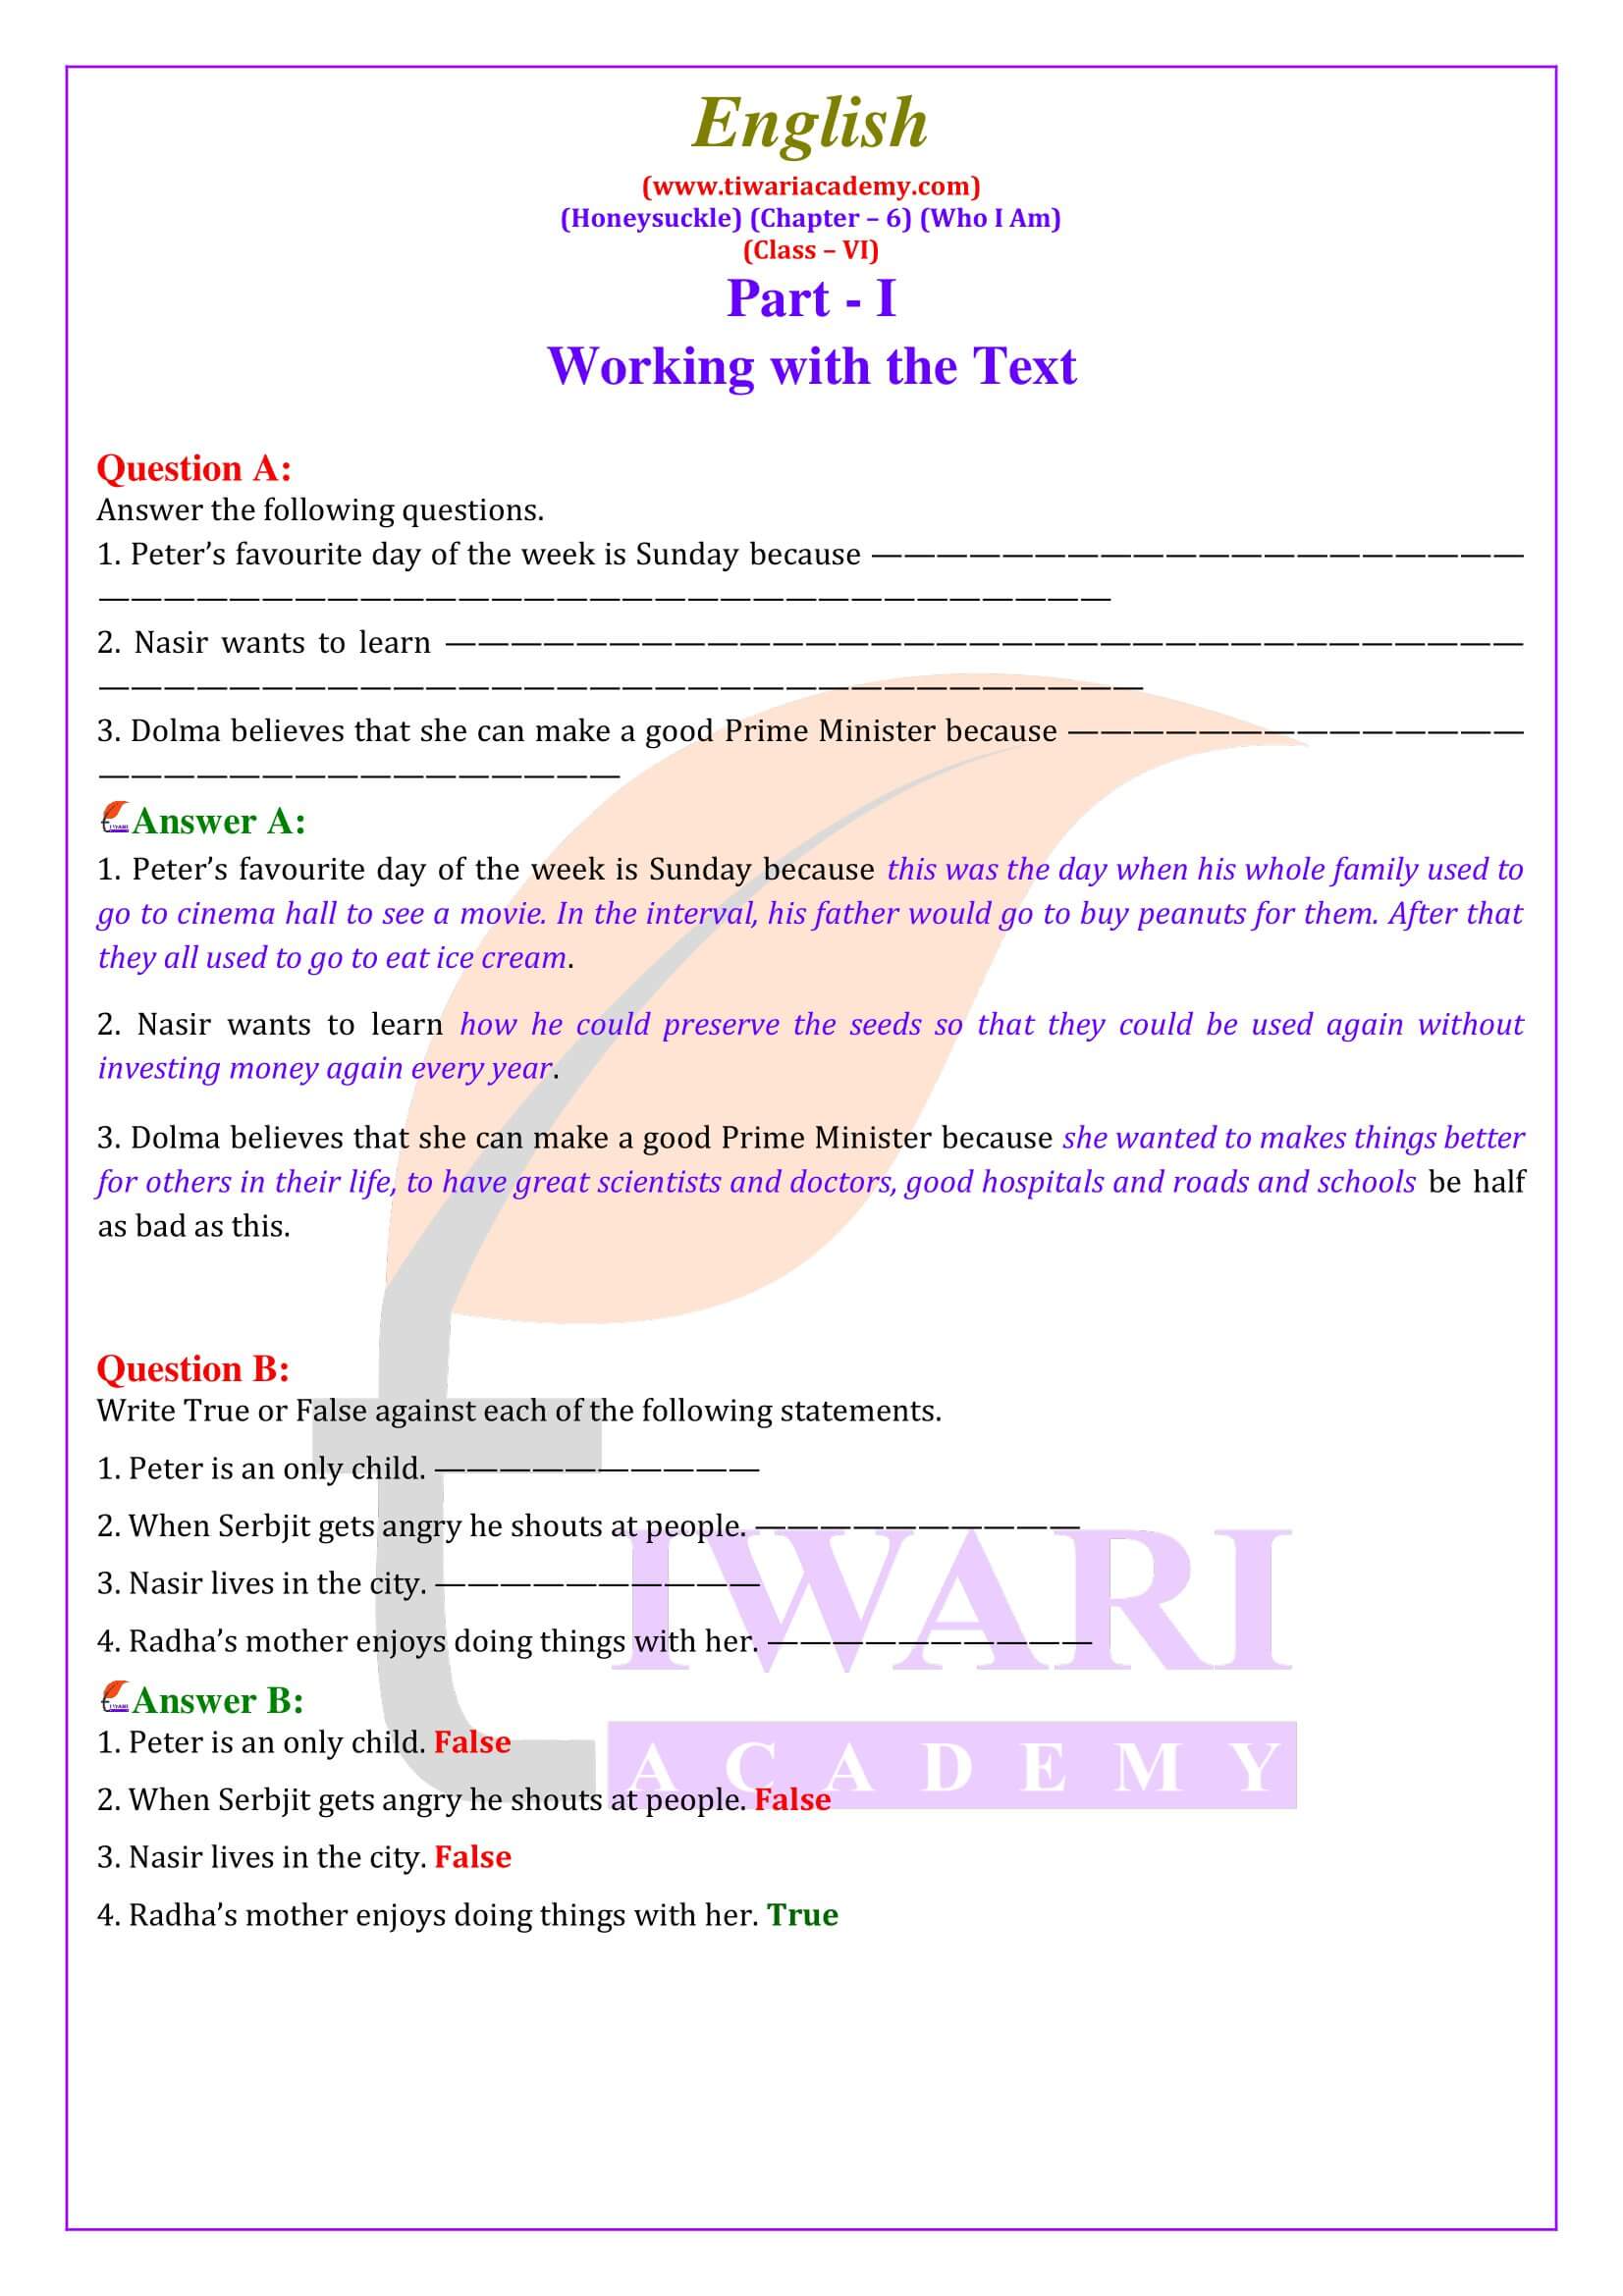 NCERT Solutions for Class 6 English Honeysuckle Chapter 6 Who I Am